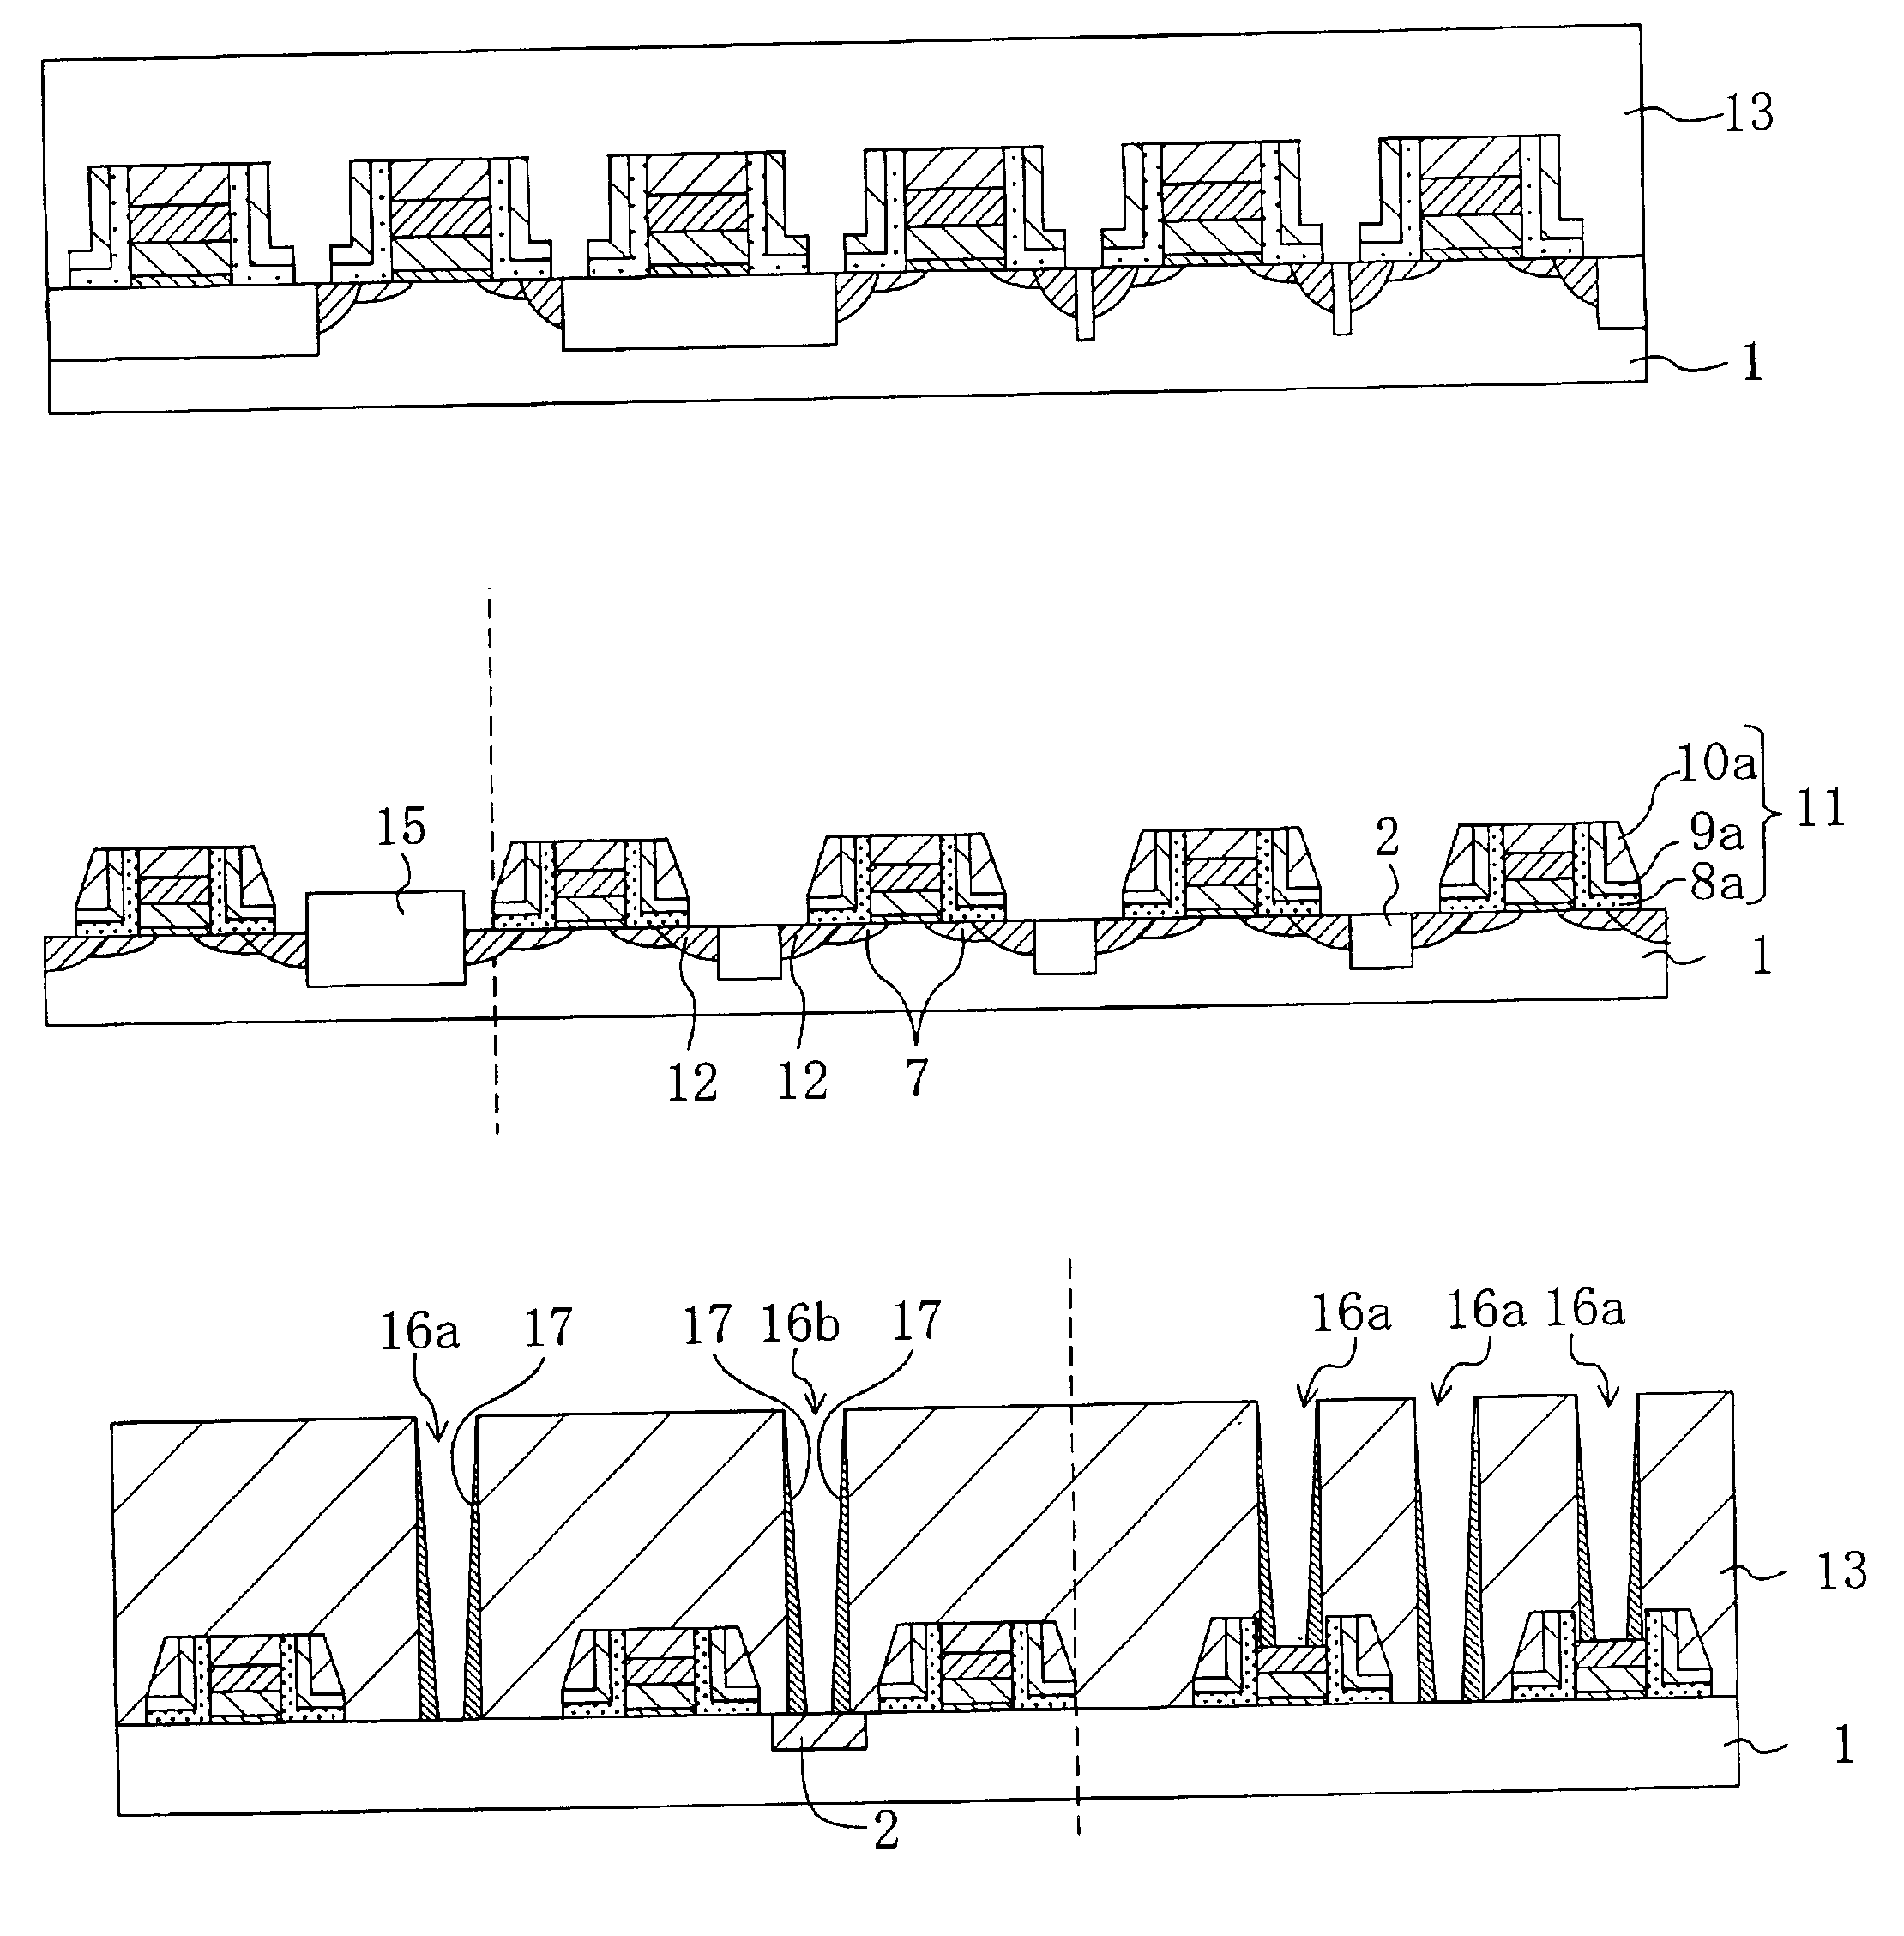 Semiconductor device utilizing dummy features to form uniform sidewall structures